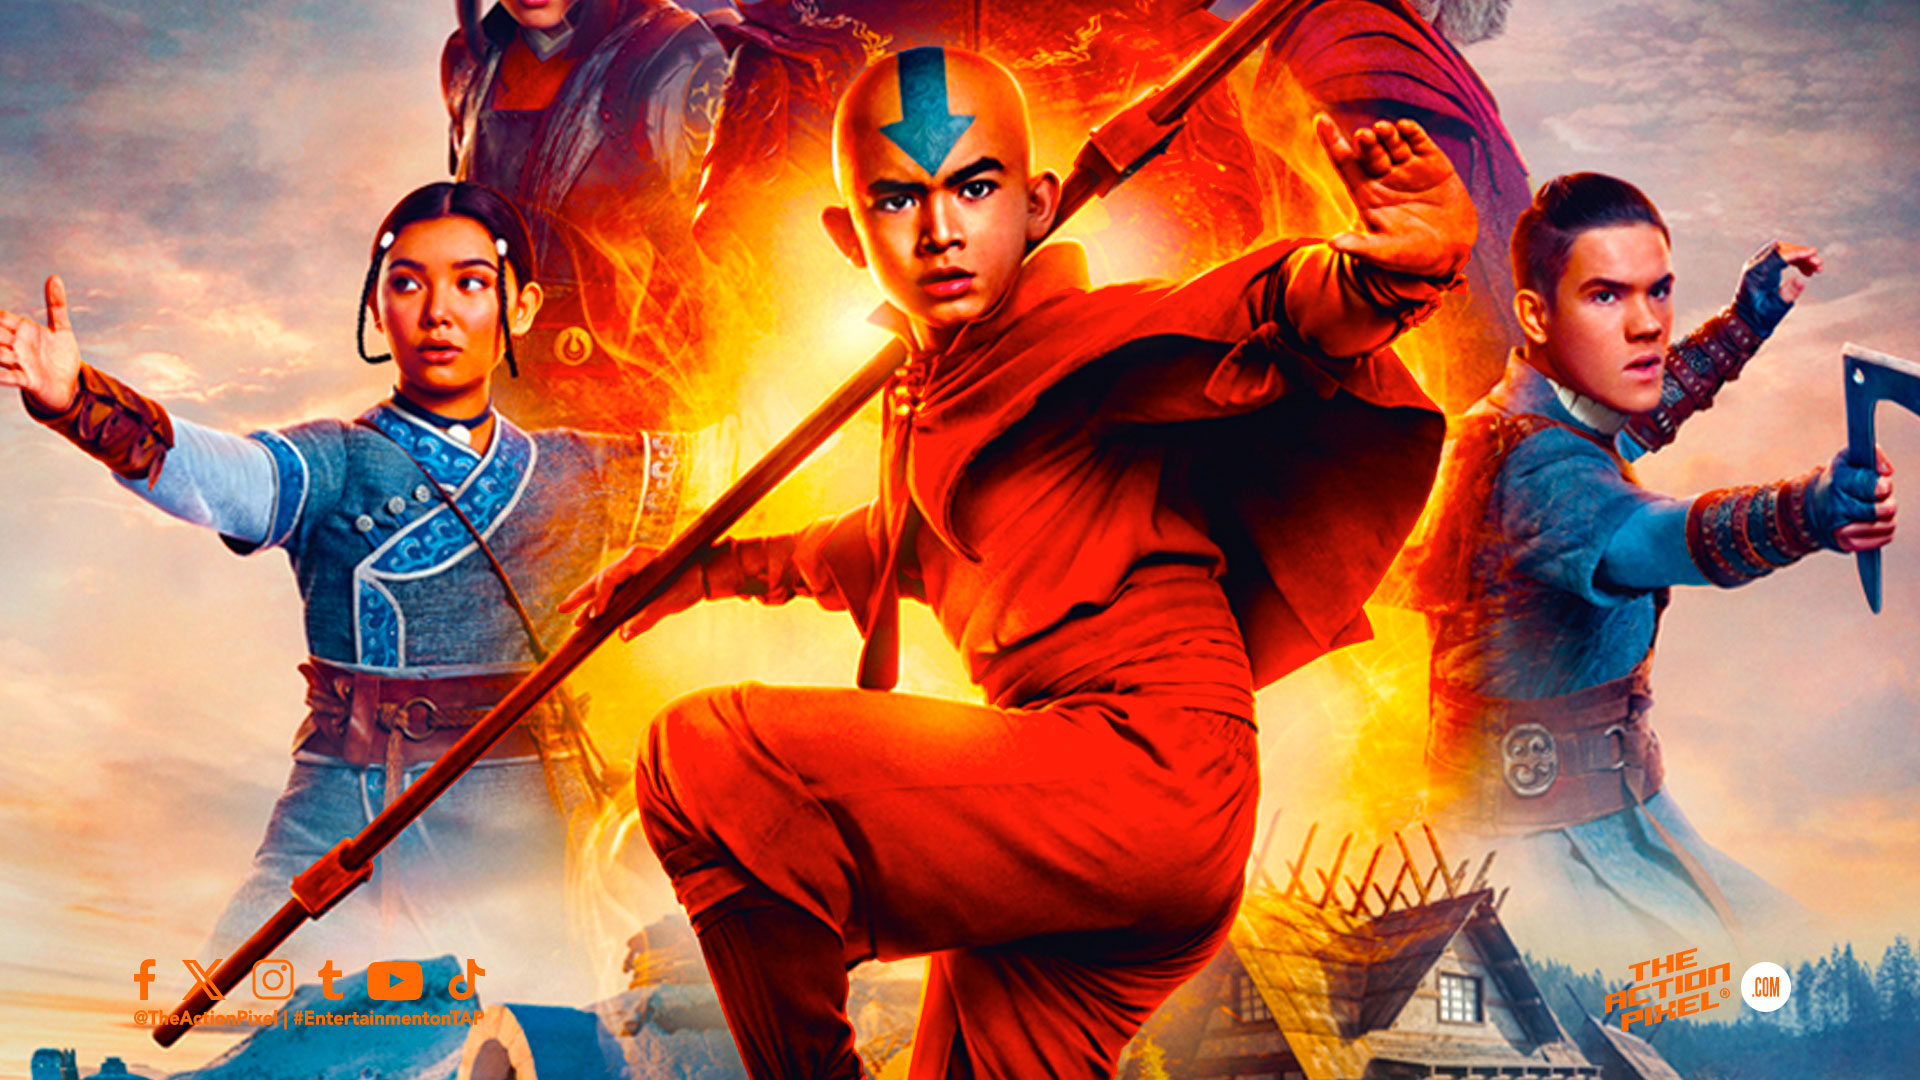 aang, the last airbender, netflix, the action pixel, soka, zuko, katara, airbender, fire nation, water tribe, earth kingdom, air nomads, netflix, nickelodeon, the action pixel, entertainment on tap, featured, the last airbender posters, the last airbender character poster, the last airbender characters,